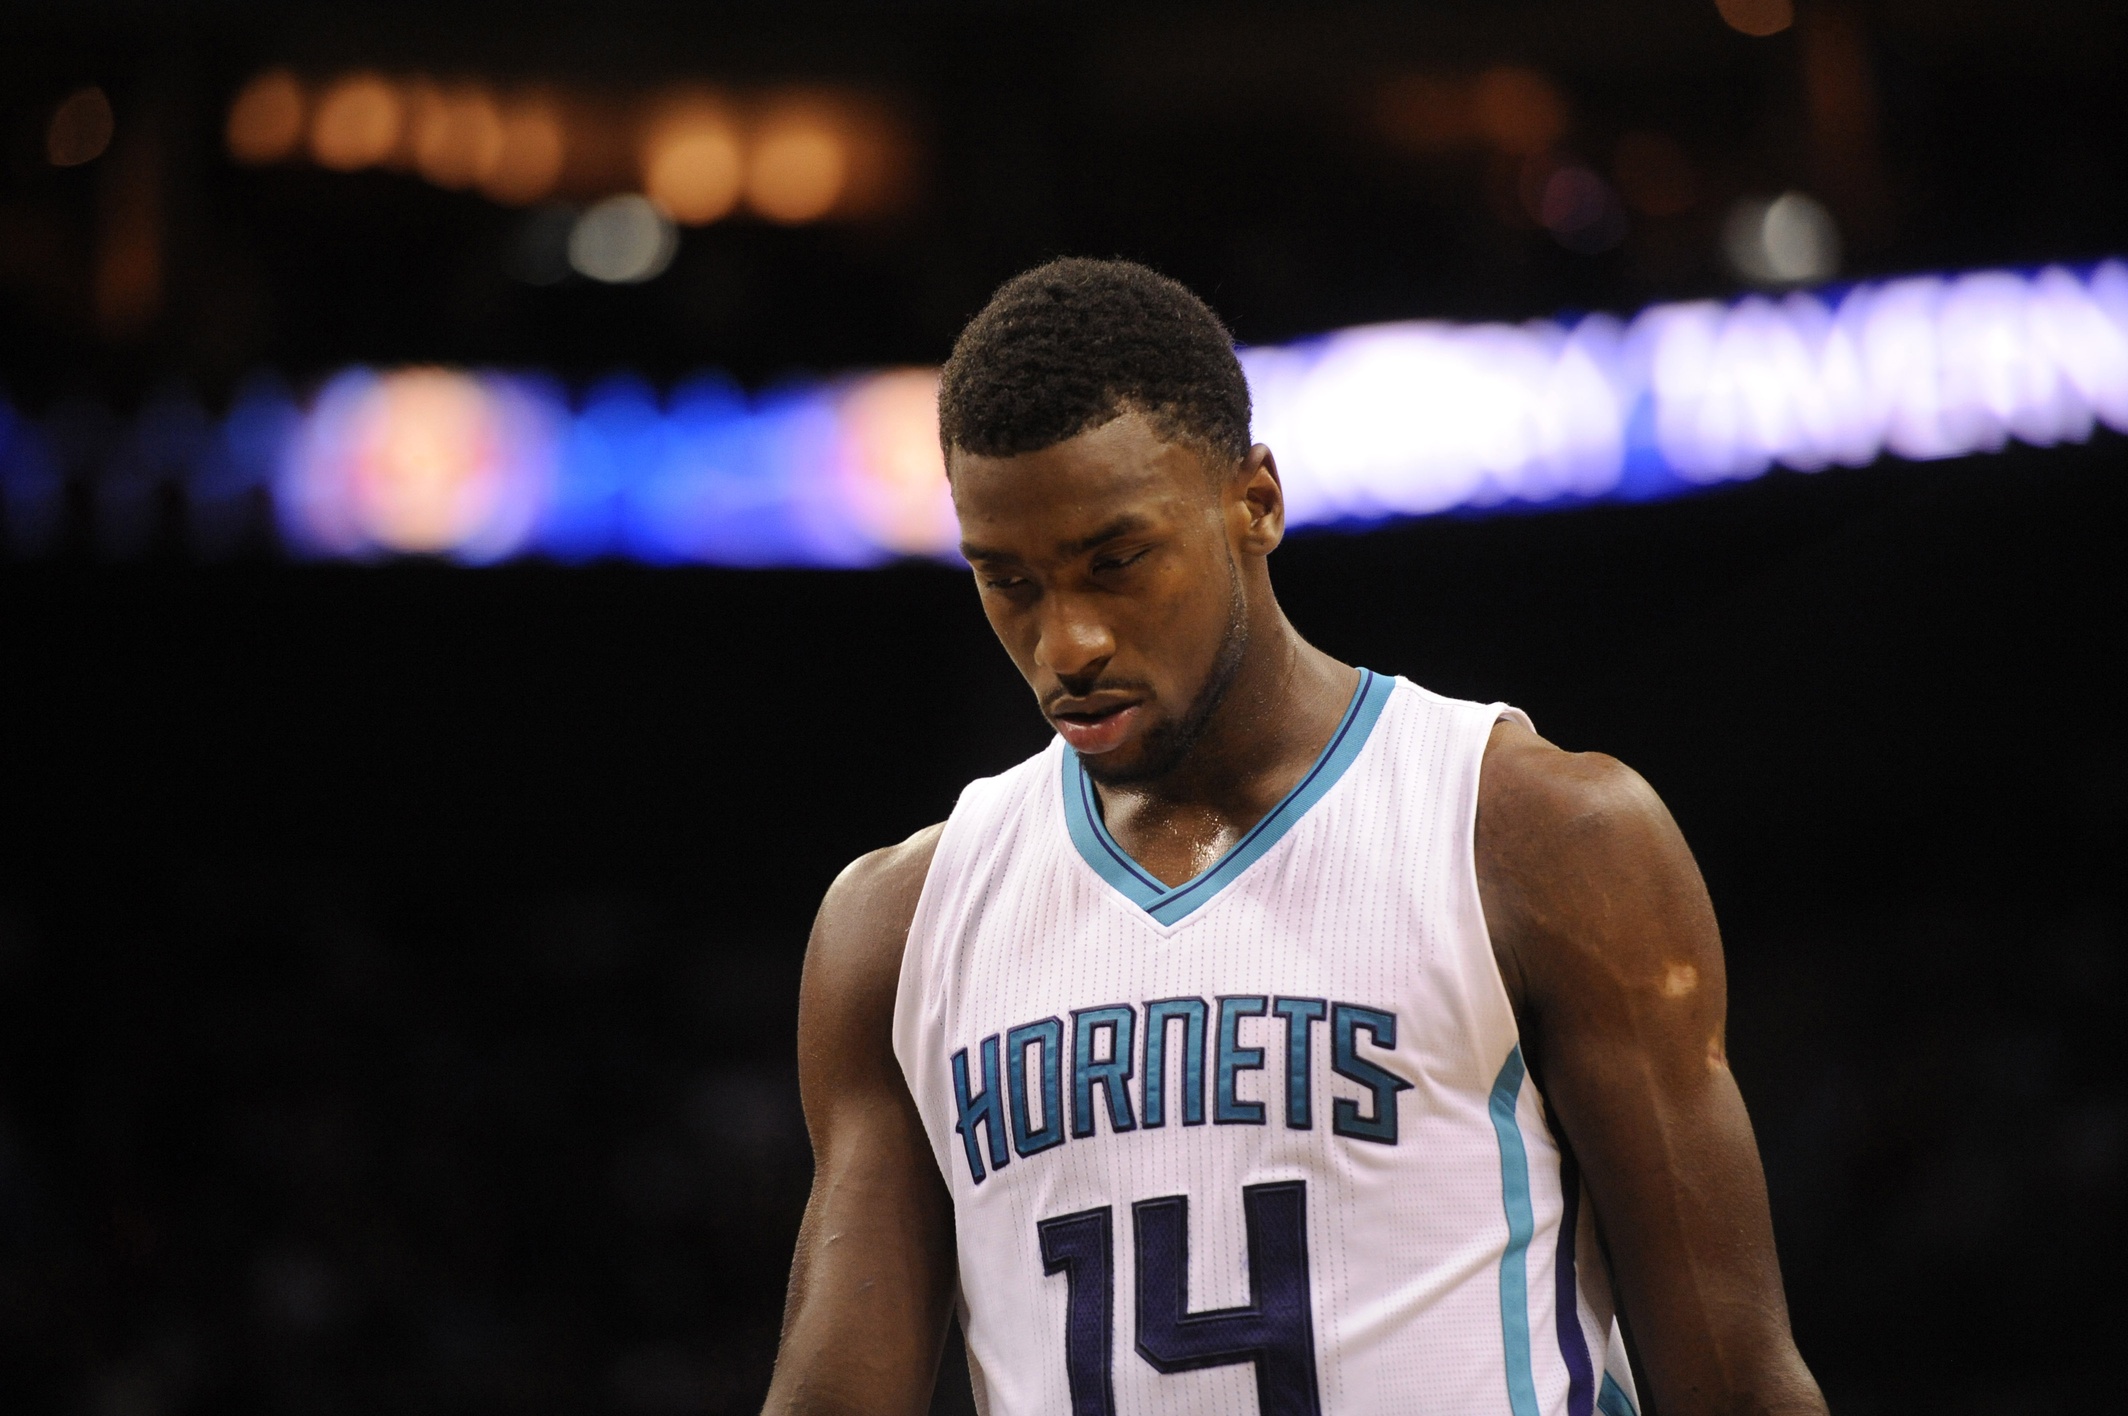 Courtesy of USA Today: Hornets slate of back-to-backs could doom the team. 